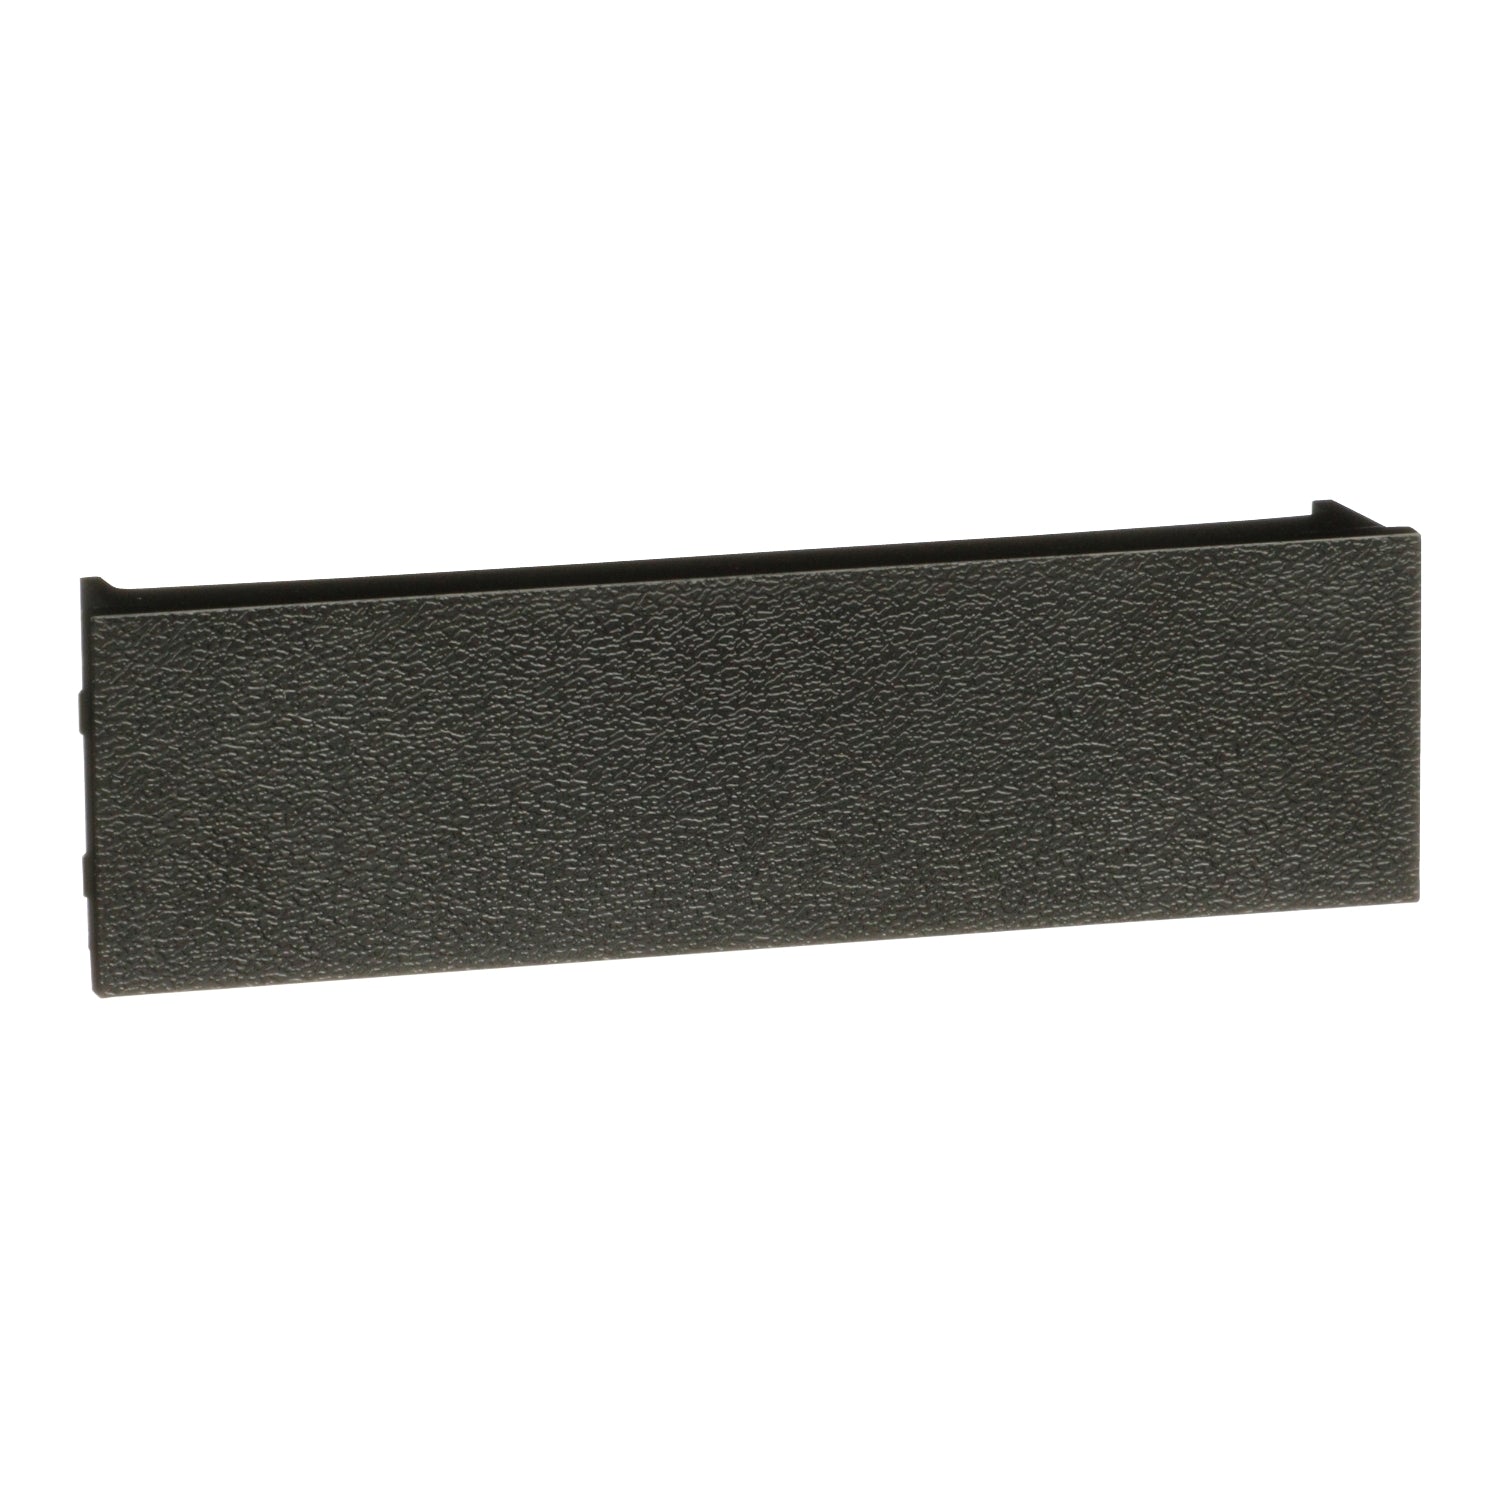 Square D EFP 1-Pole Filler Plate Accessory for NF Panelboard